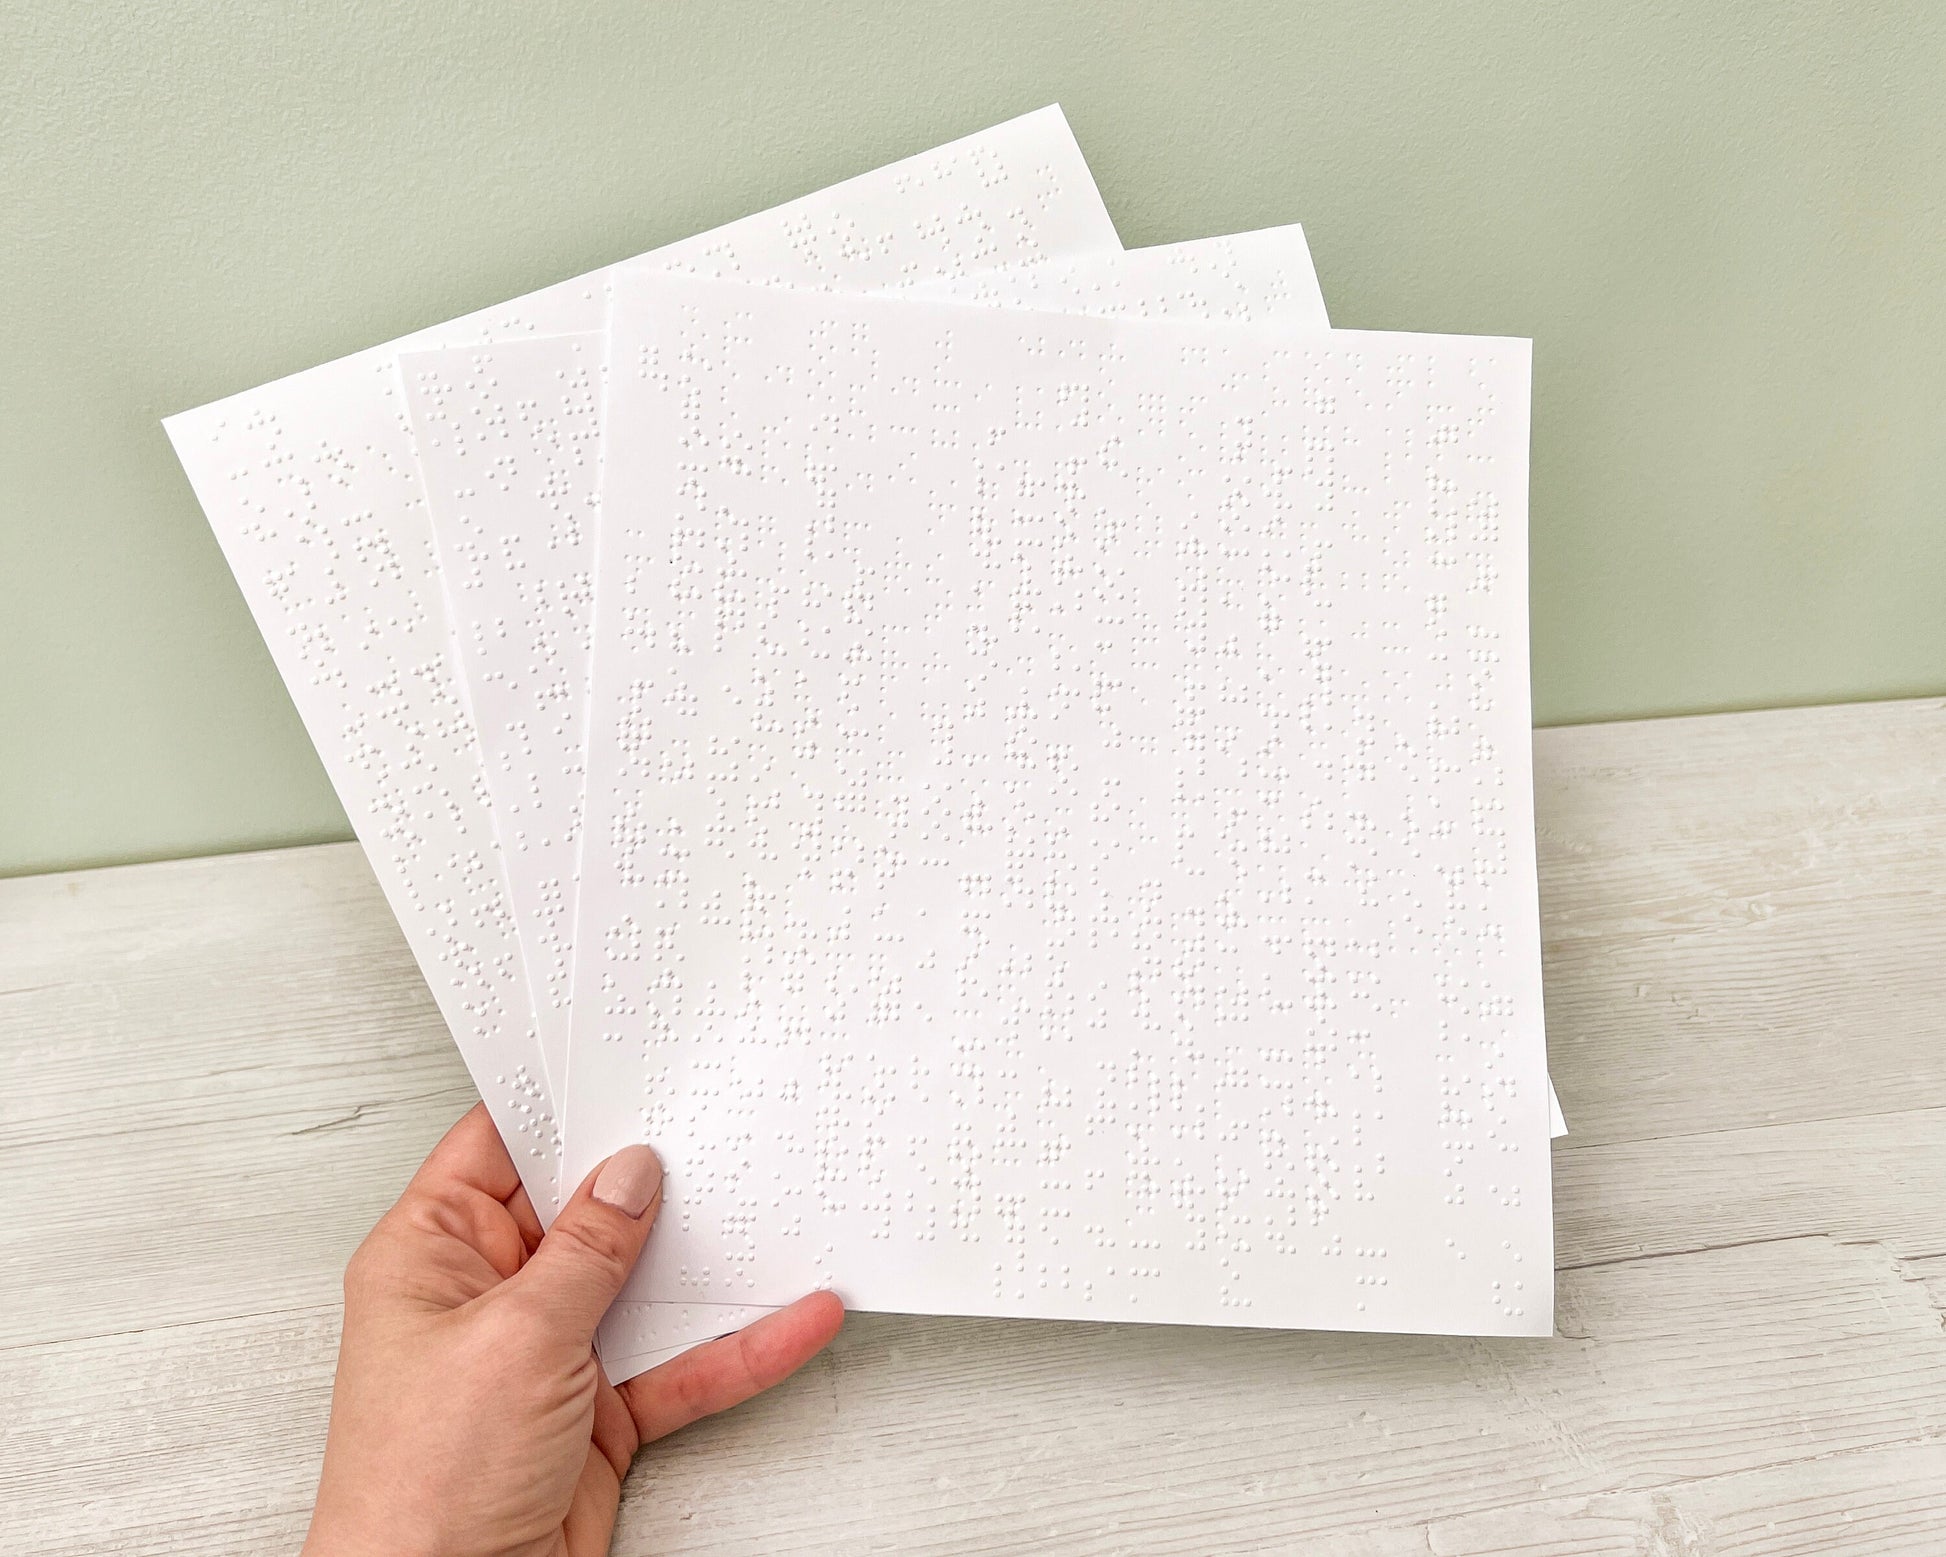 Three sheets of 22x23cm white braille paper are being held by a hand.